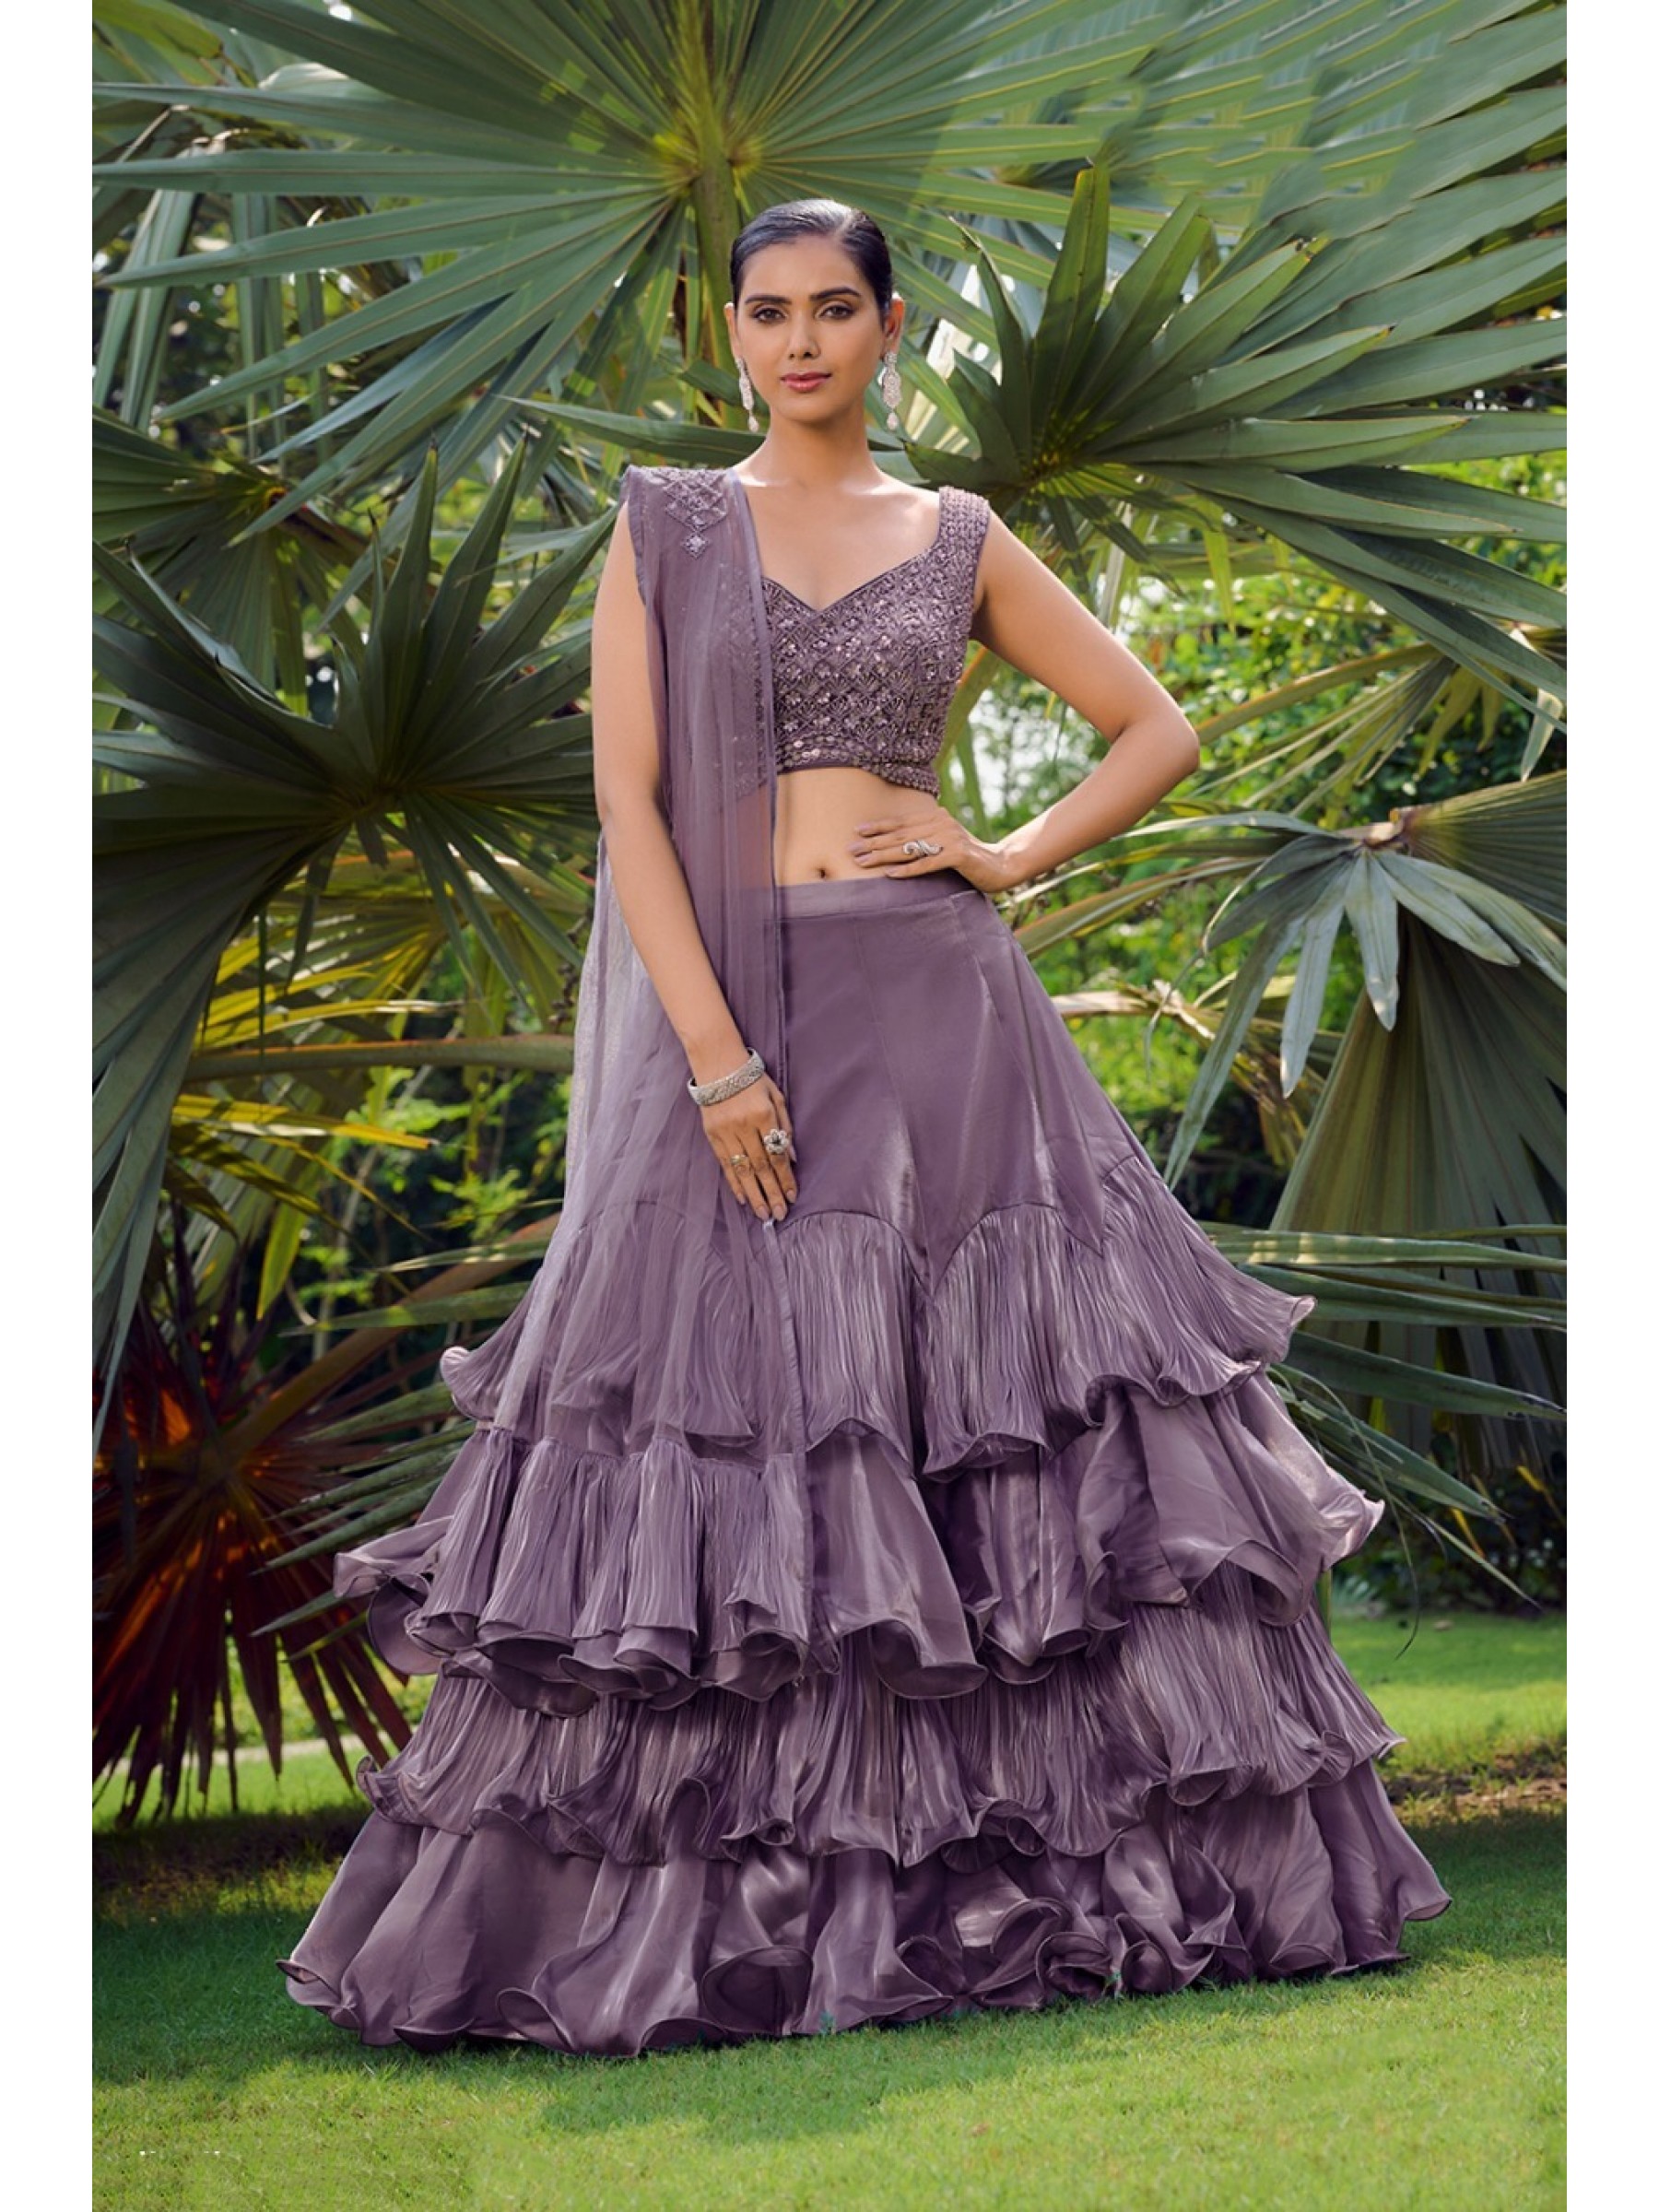 Silk Party Wear Crop Top  In Mauve color With Embroidery Work 